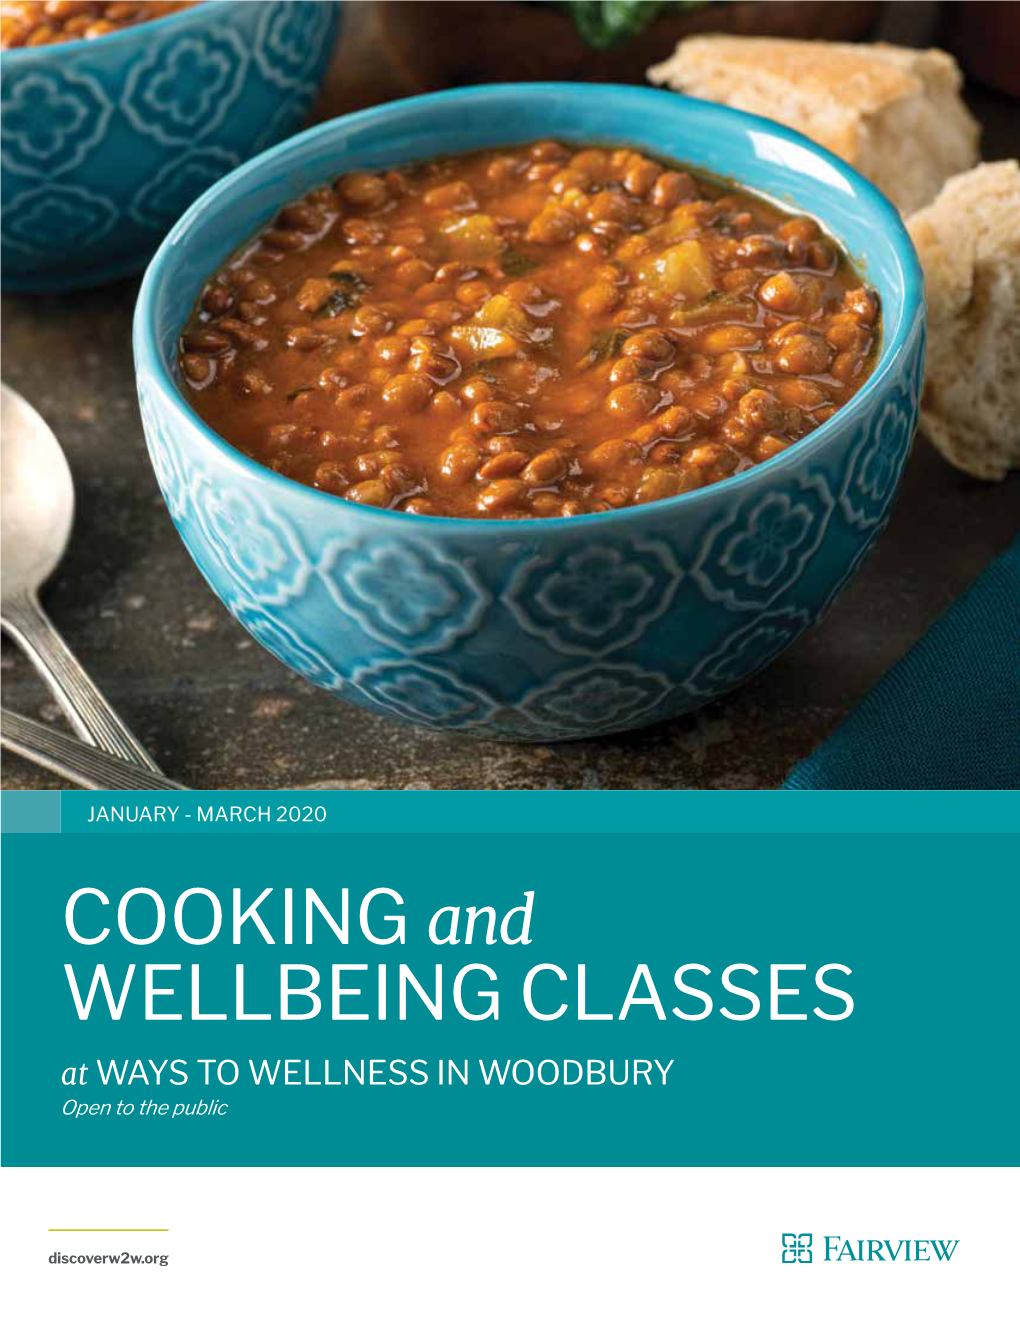 COOKING and WELLBEING CLASSES at WAYS to WELLNESS in WOODBURY Open to the Public